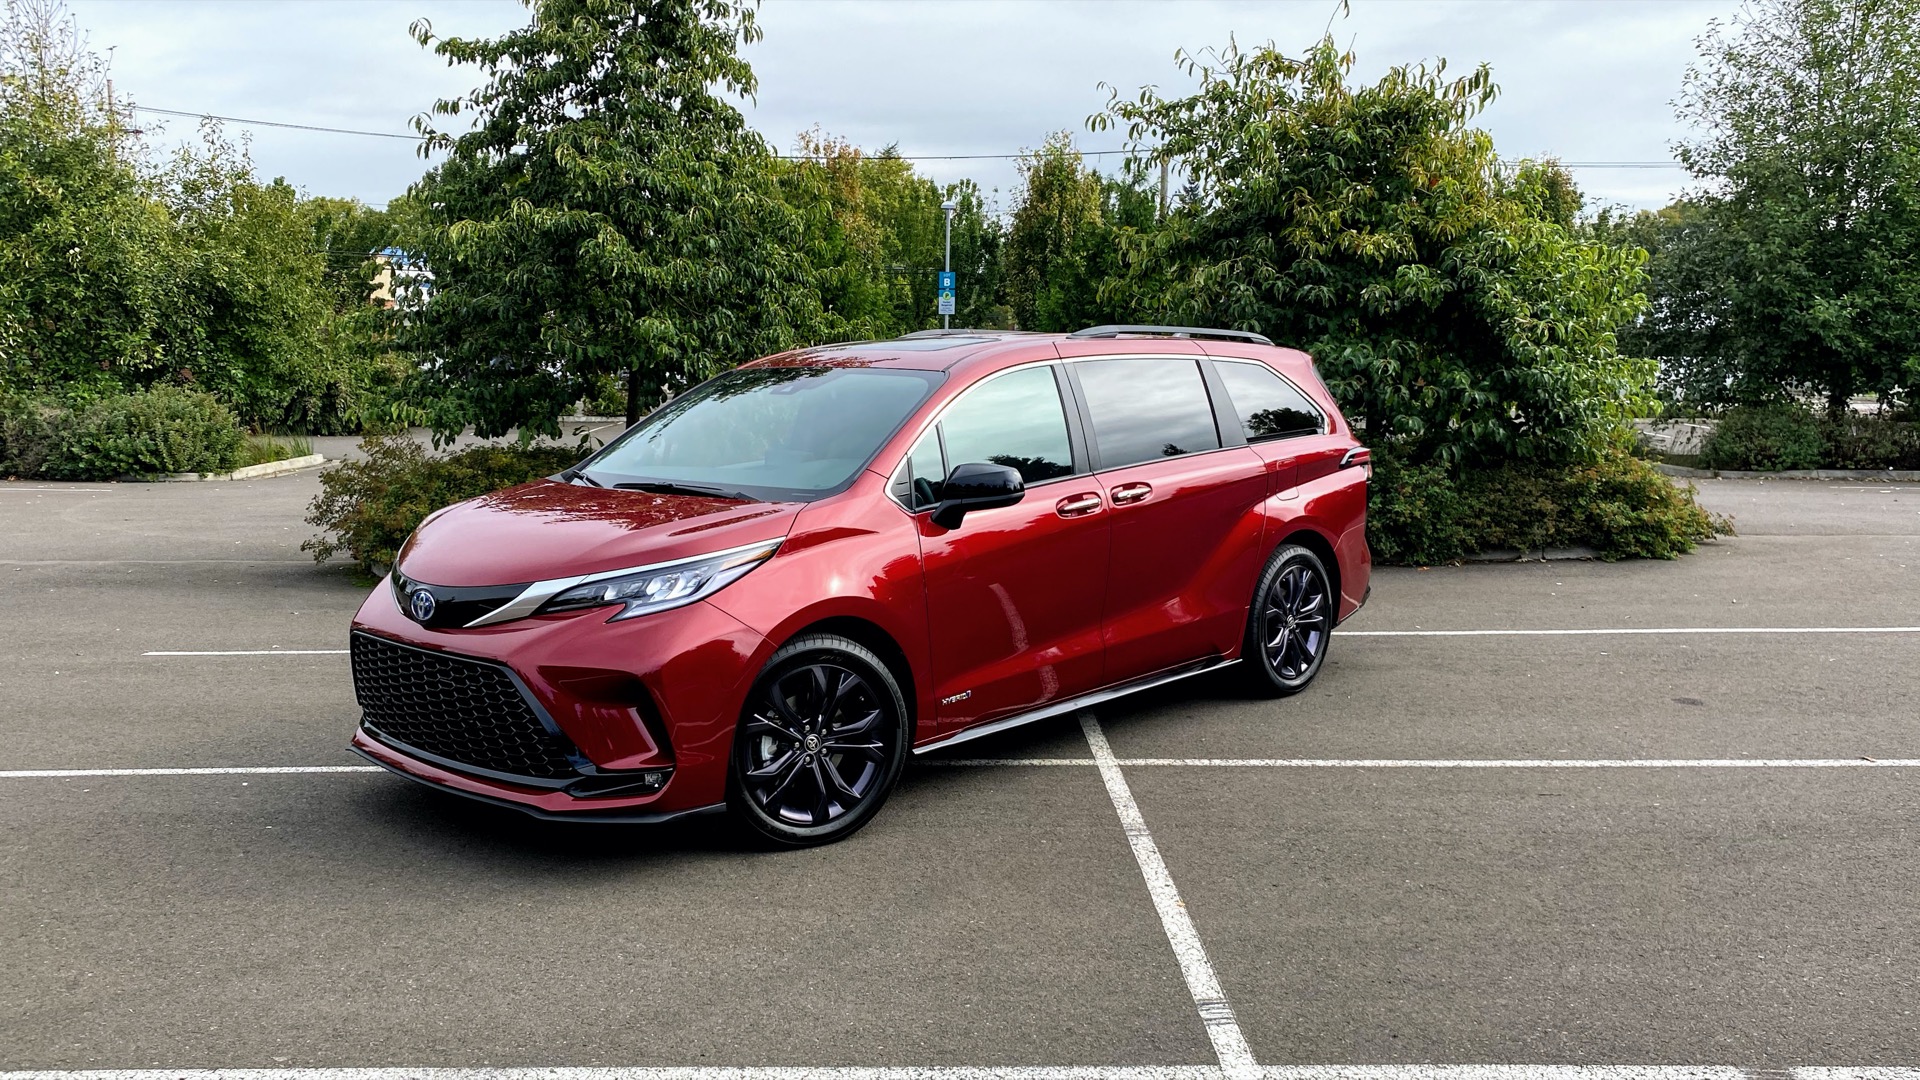 2021 Toyota Sienna first drive: 36 mpg and design flair make the minivan  relevant again